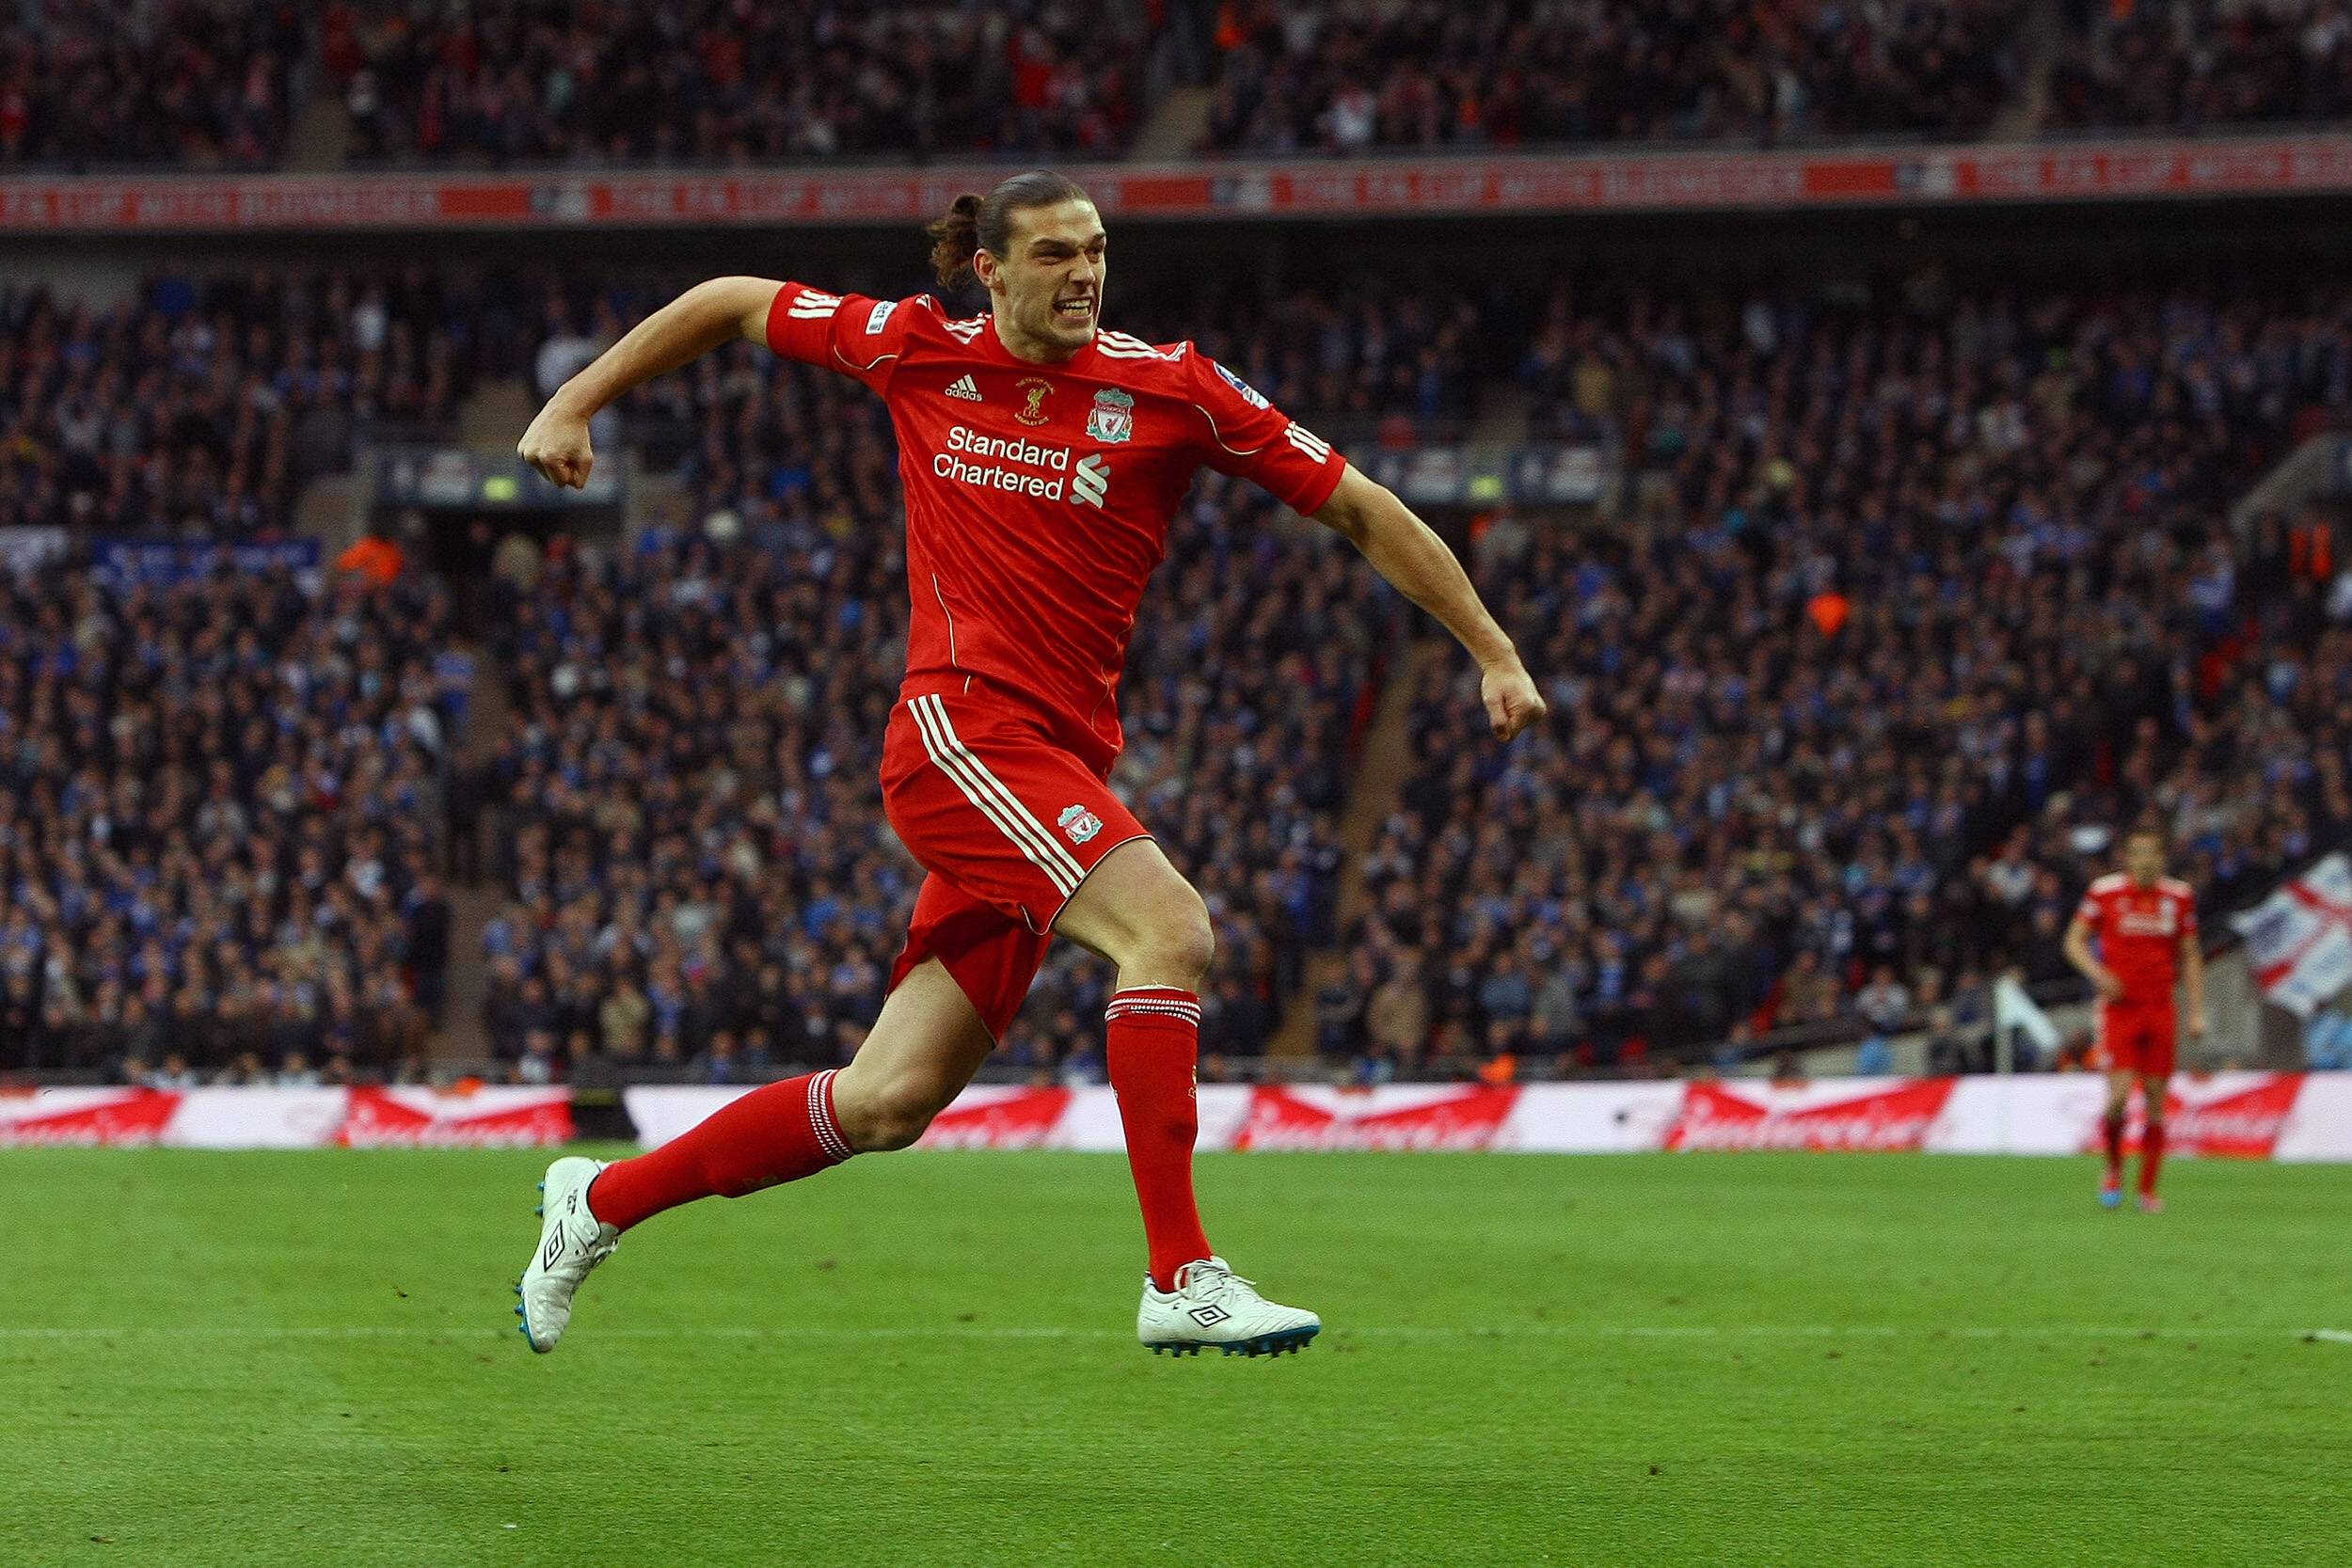 Liverpool’s Darwin Nunez debut - the return of Andy Carroll or just a bad start?